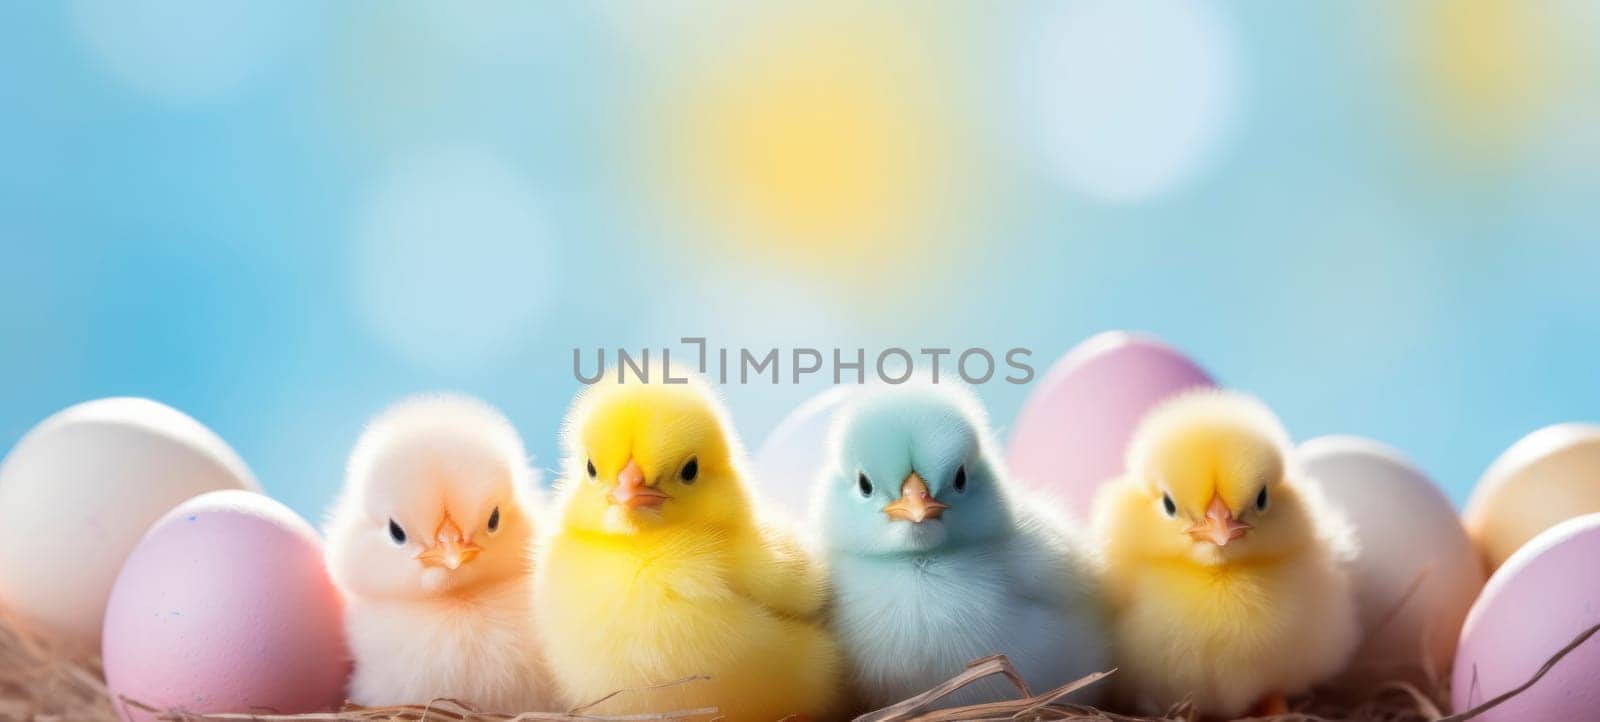 Cute chicks amidst pastel Easter eggs